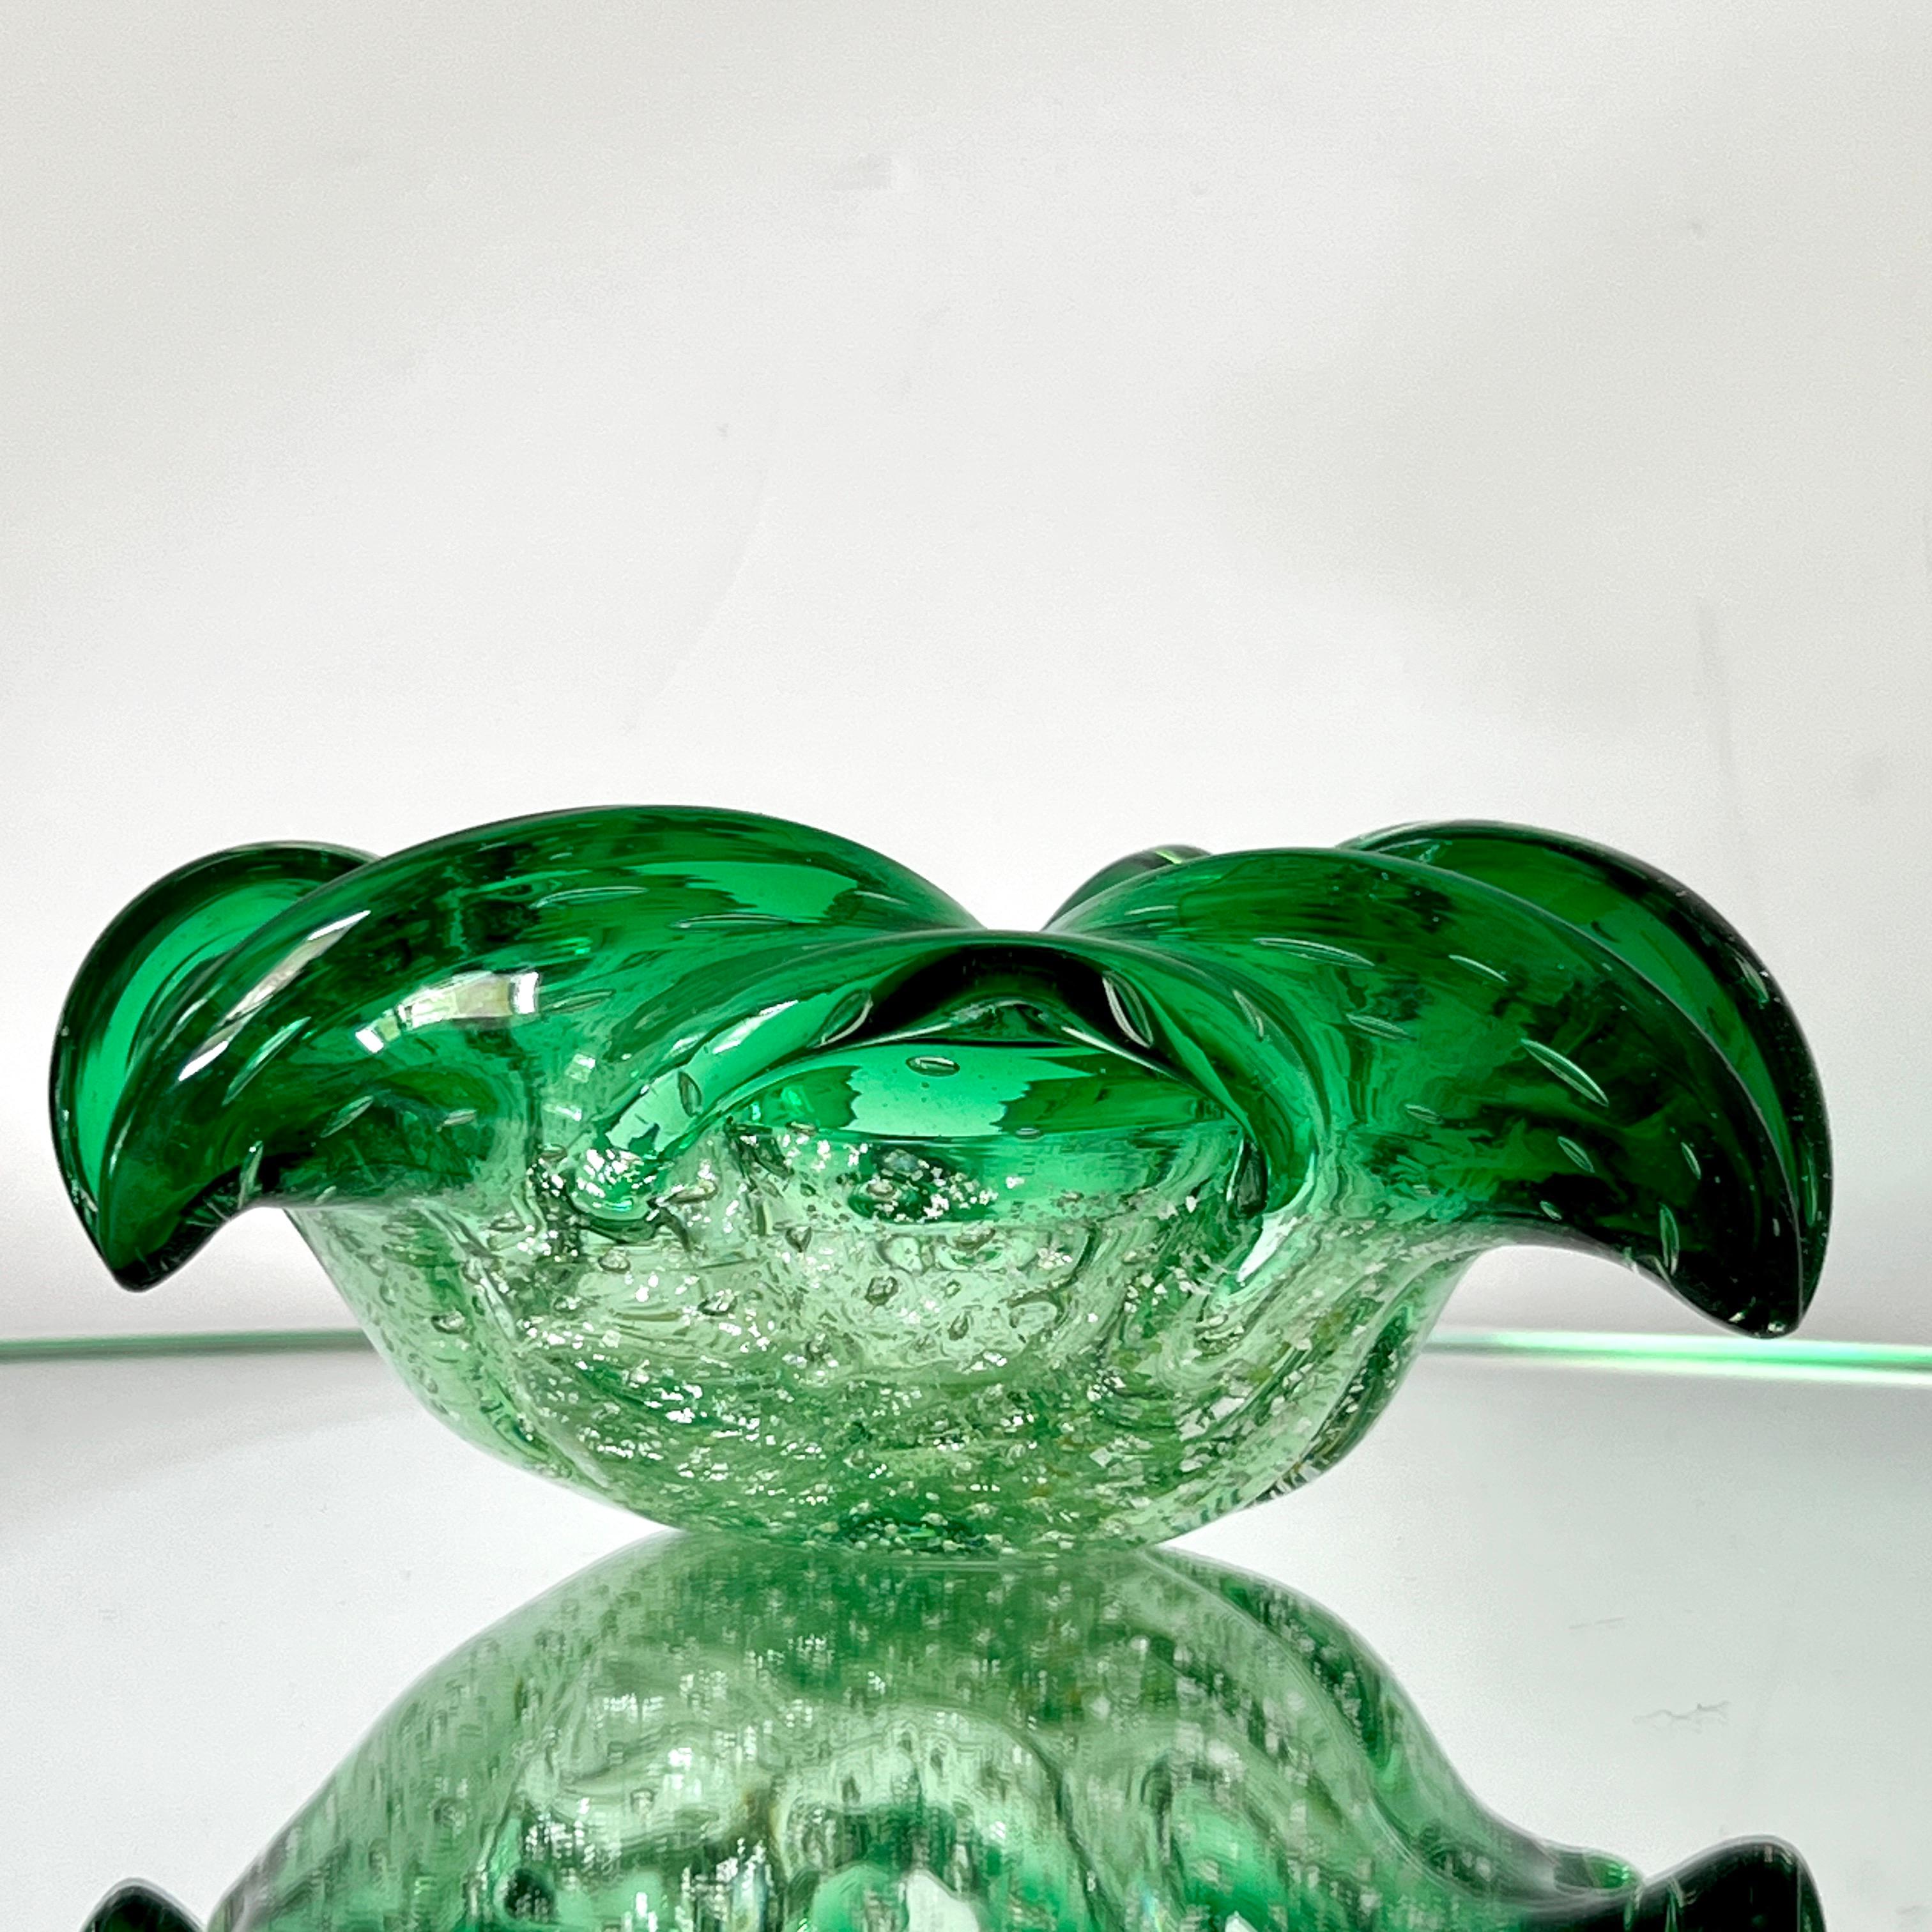 Mid-Century Modern Green Murano Vide-Poche Bowl or Ashtray with Gold Leaf Accents, Italy, c. 1950 For Sale